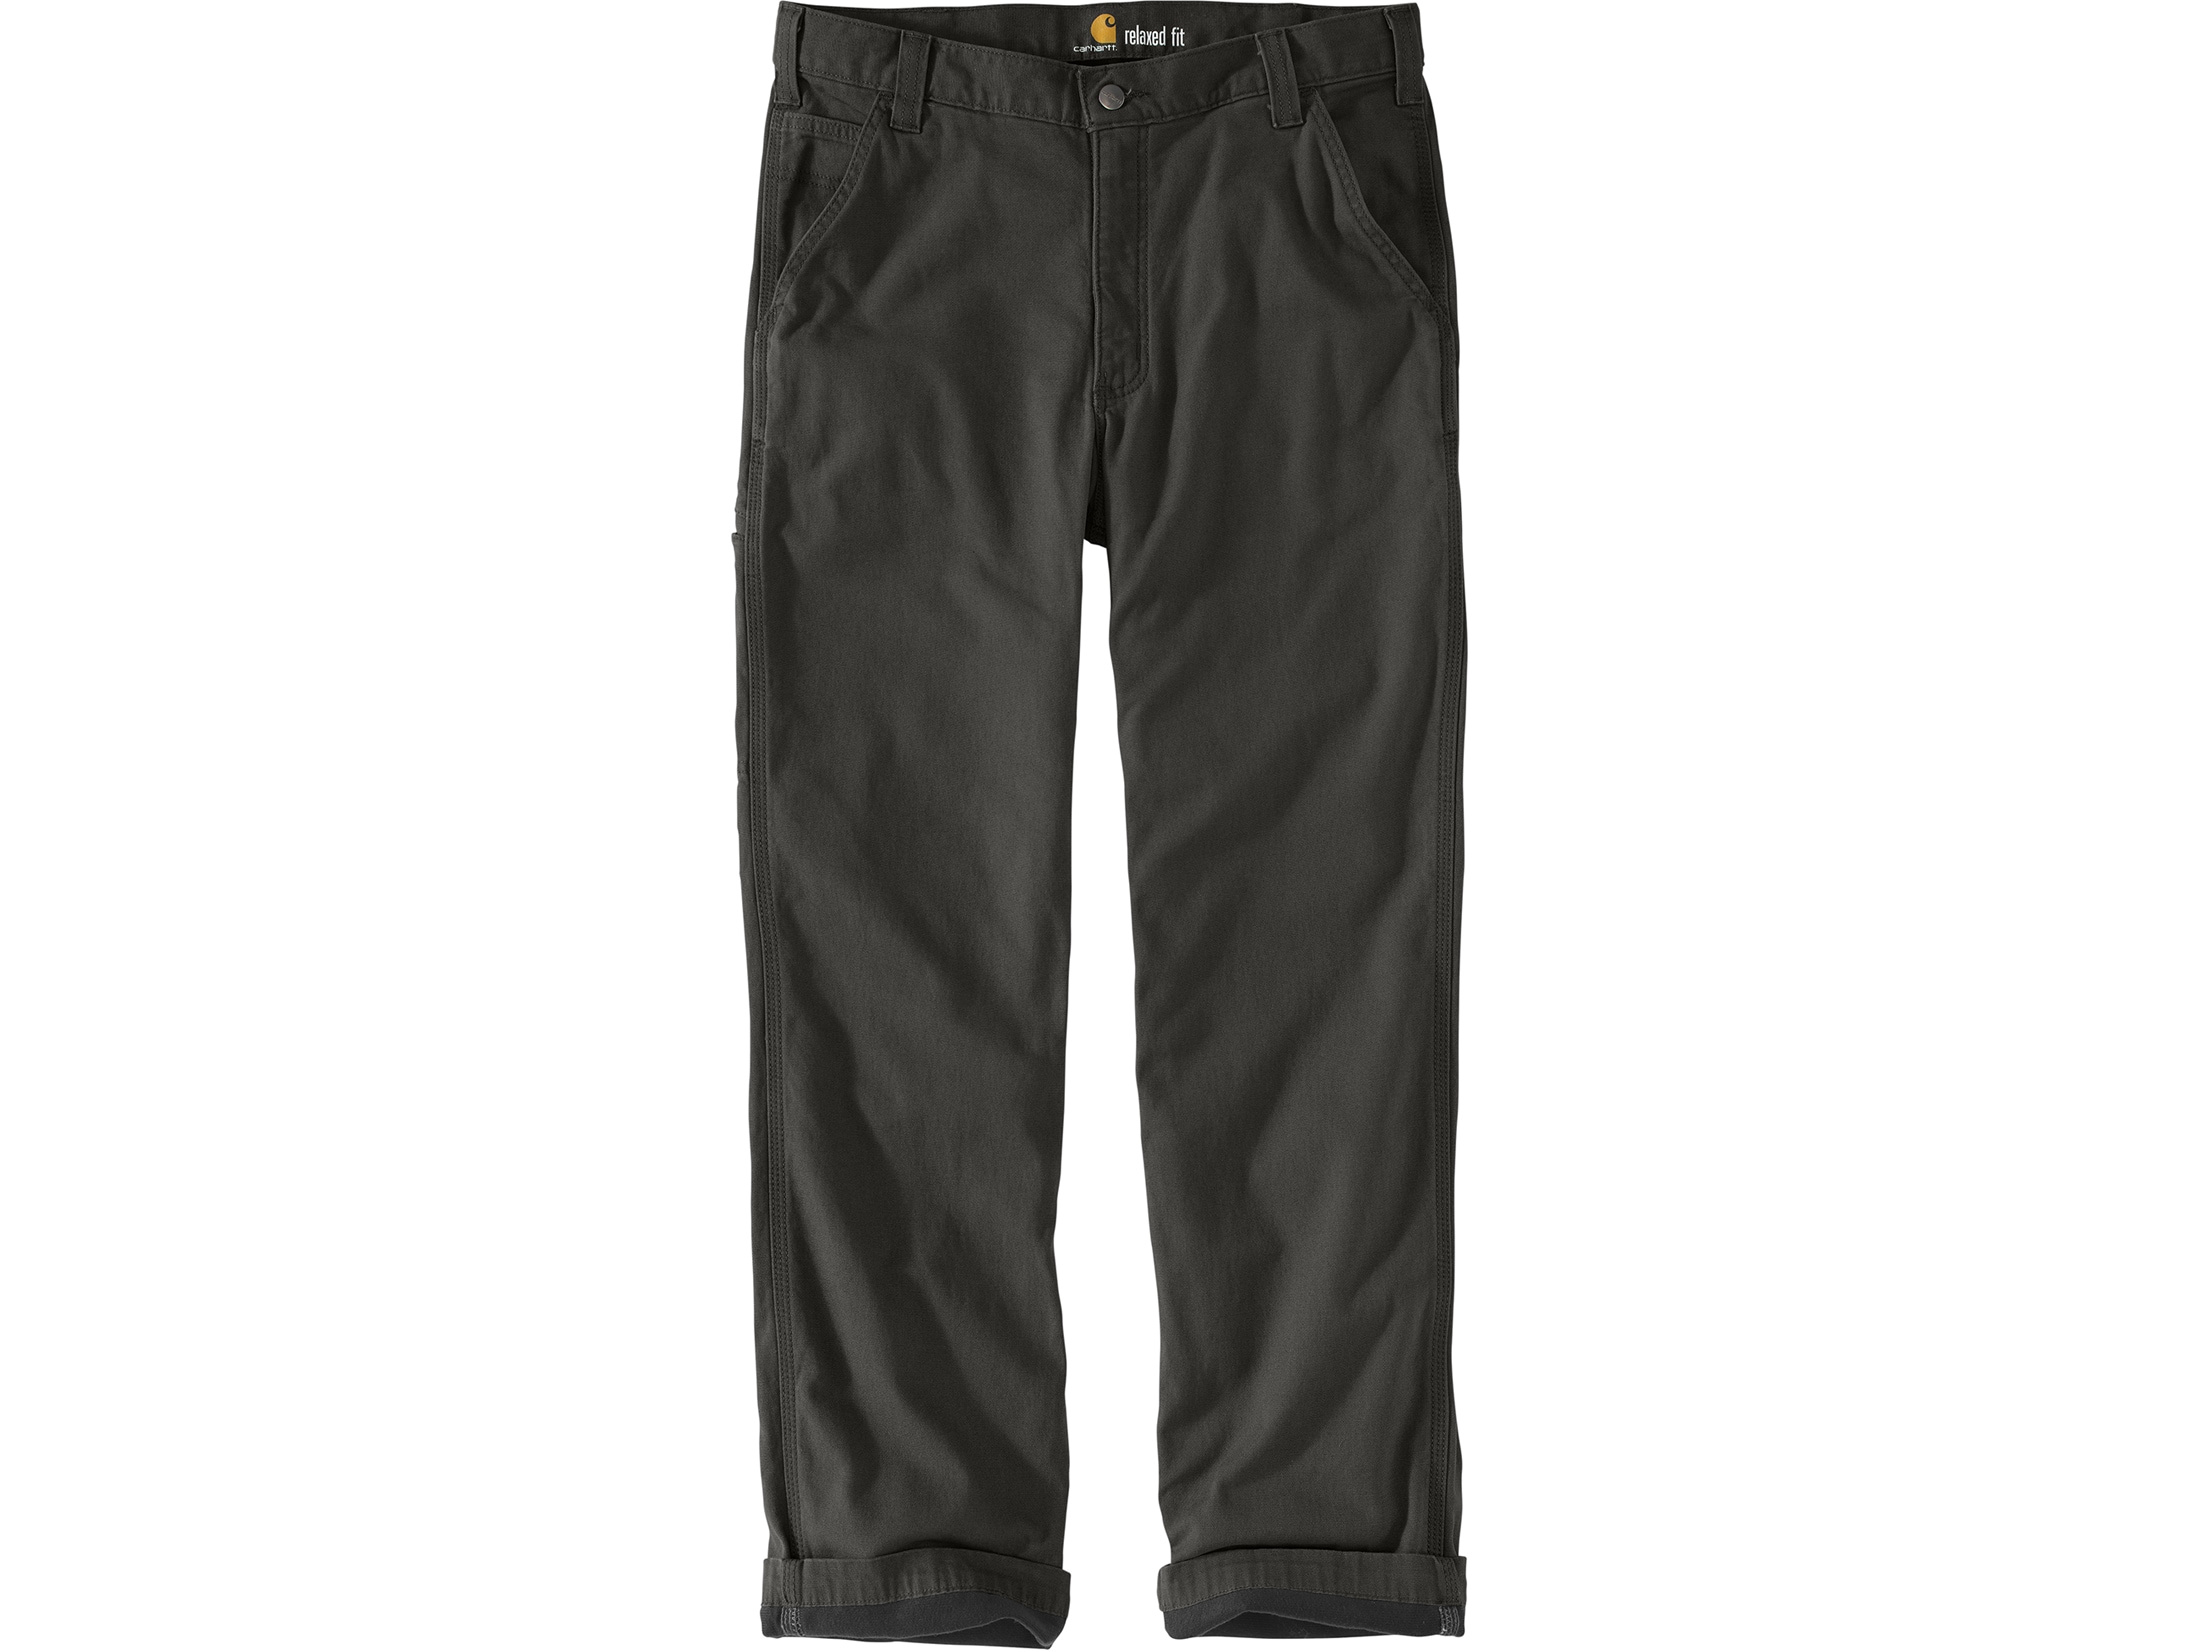 Carhartt Men's Rugged Flex Relaxed Fit Canvas Flannel Lined Work Pants